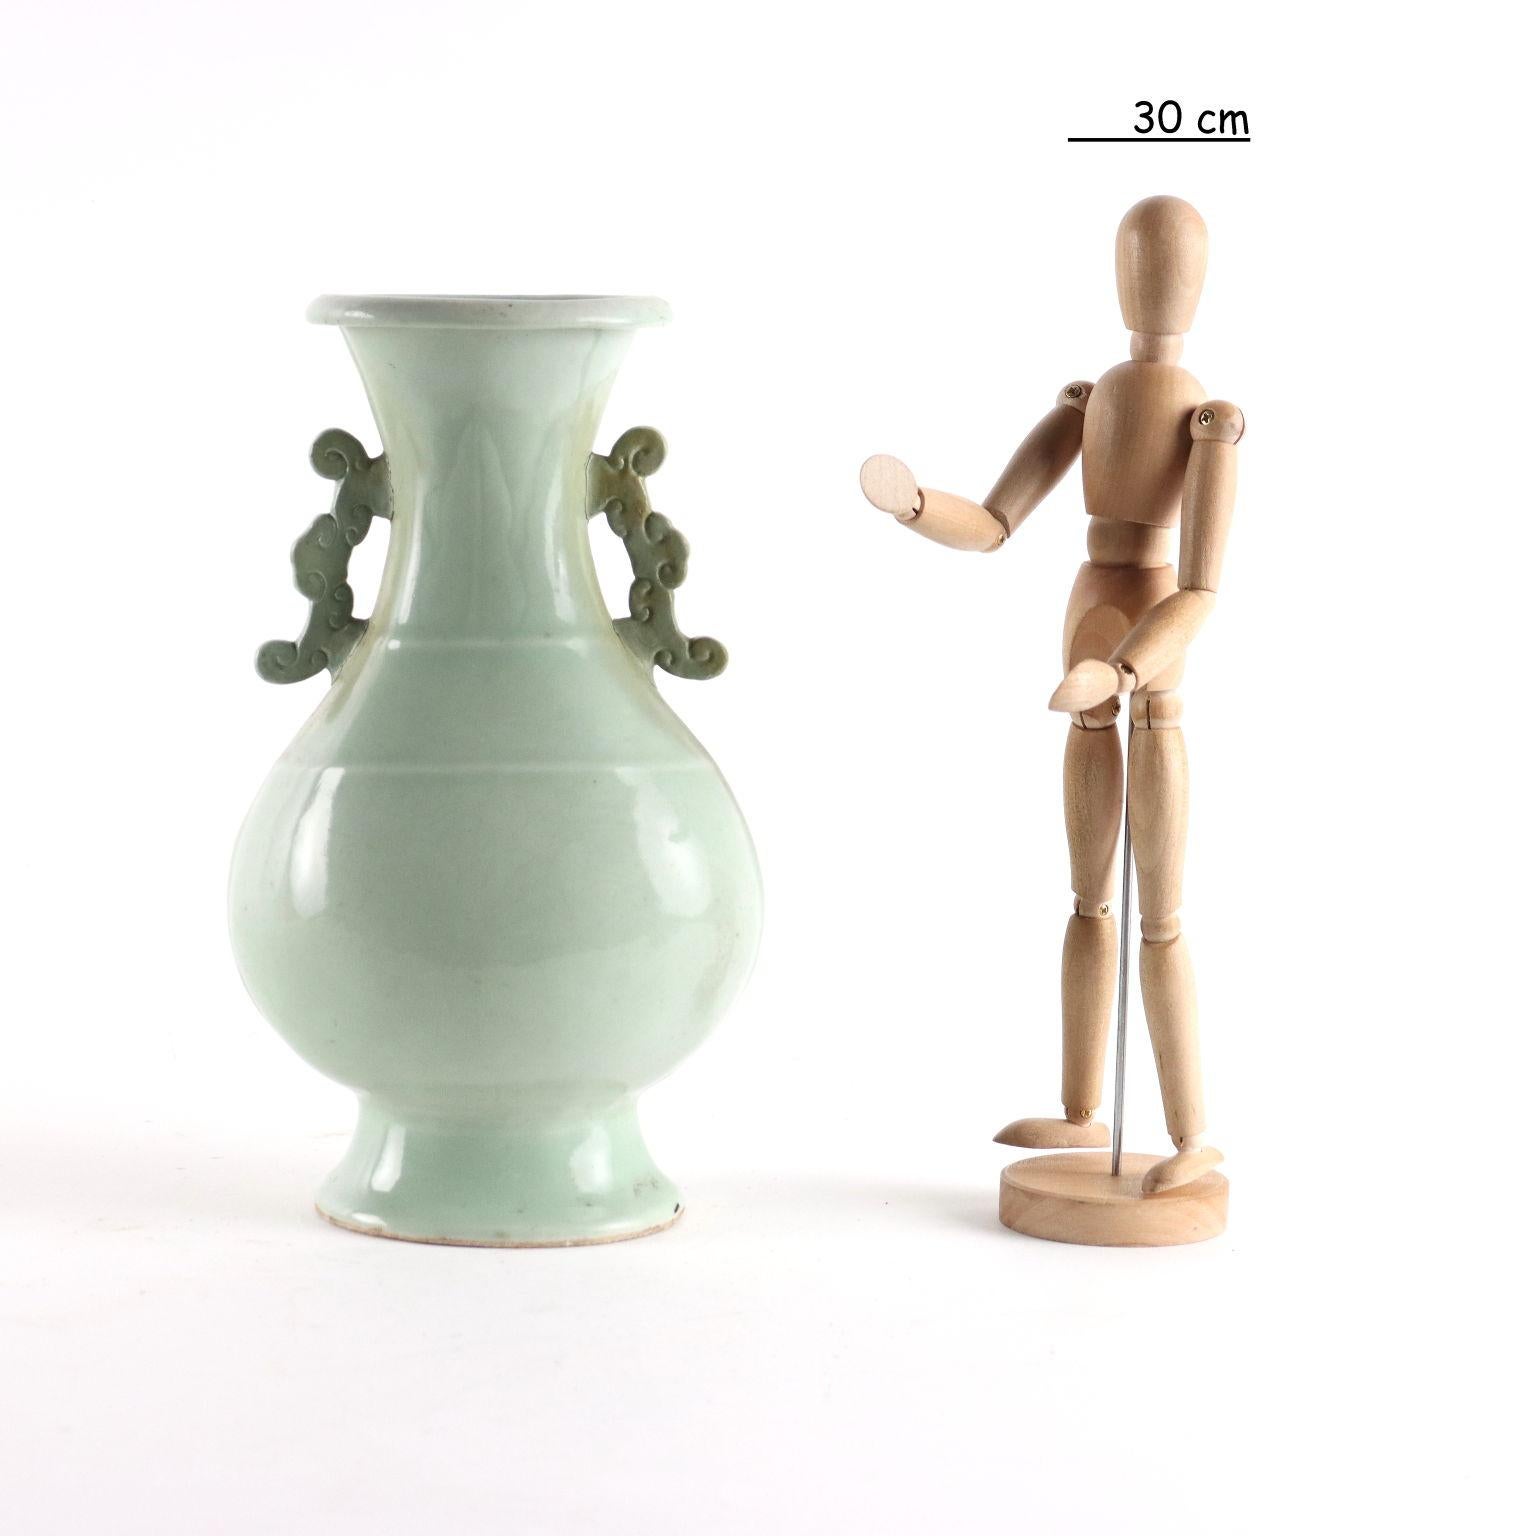 Longquan vase with baluster shape and celadon-colored background, finely engraved in bands, in the upper part with plane tree leaves motifs, side grips in the shape of stylized clouds. Central and lower band with plant racemes.